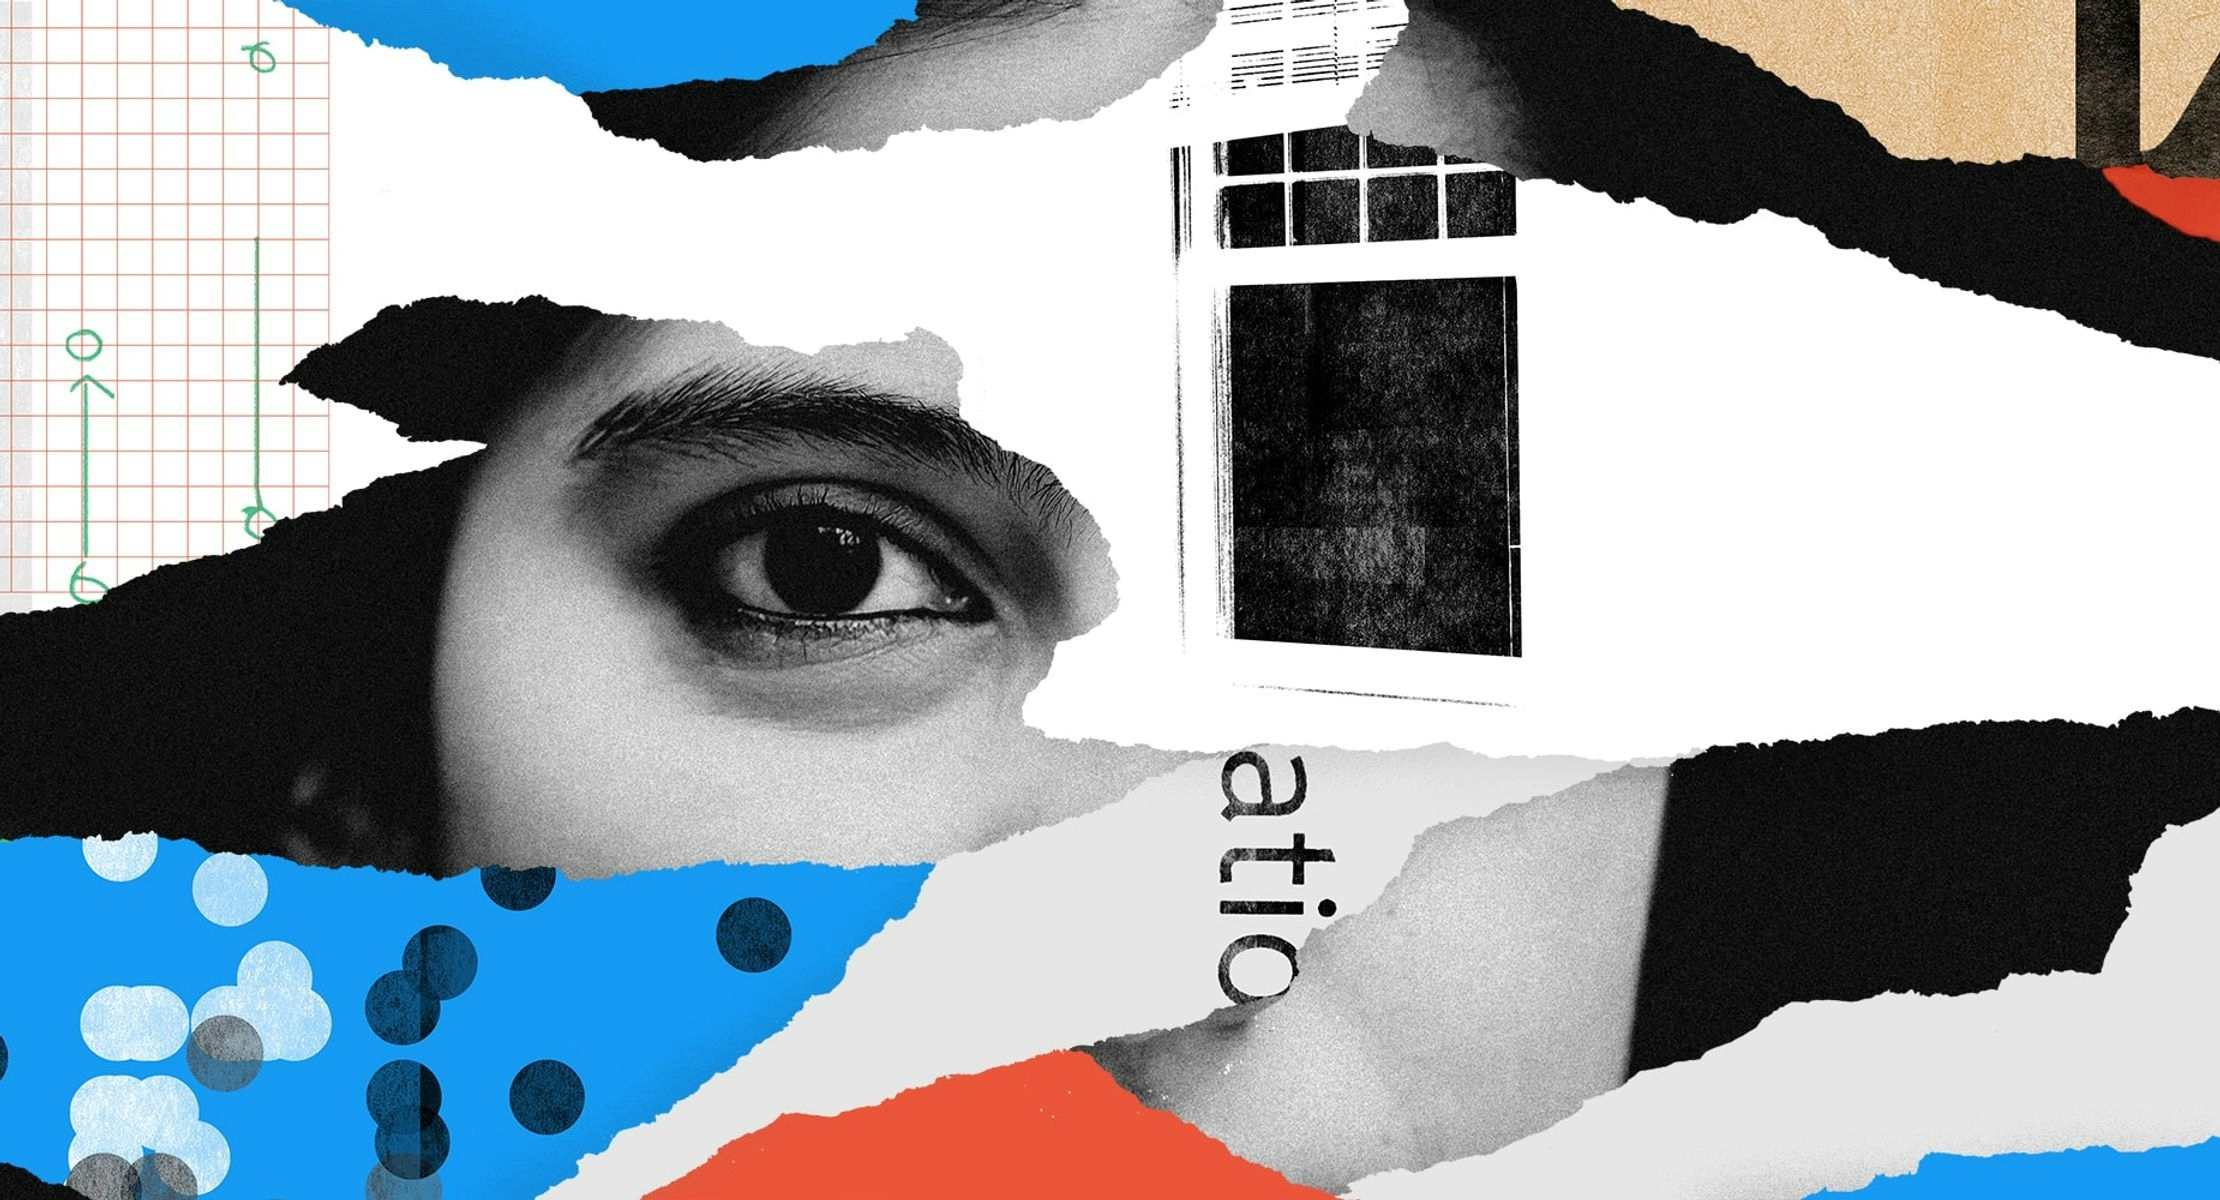 A collaged banner where each piece is like a scrap of torn paper. A women's eye and parts of her face stare out of the image, while other tears have colourful illustrations or text.